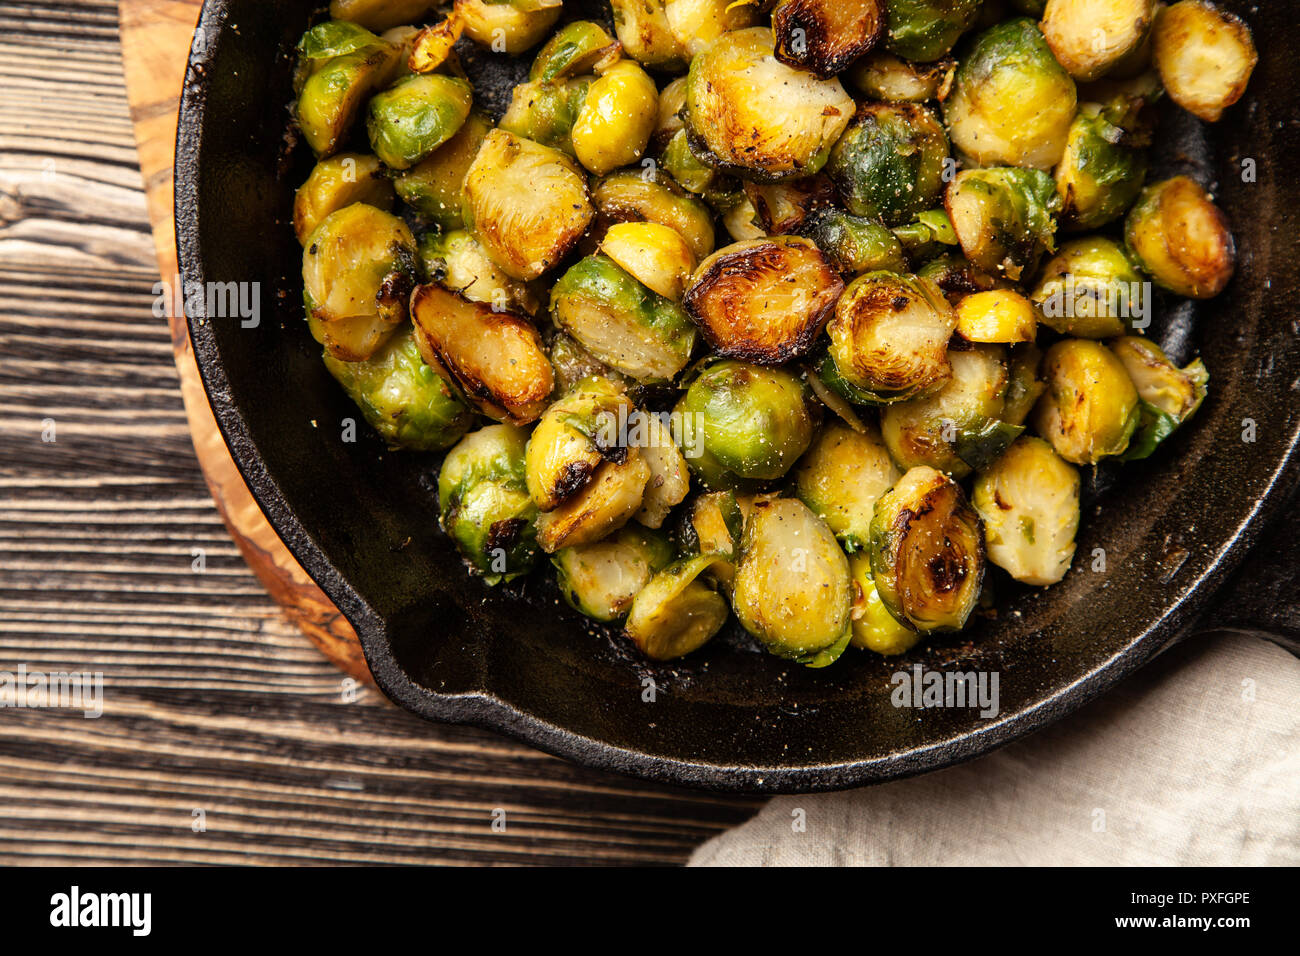 Honey roasted brussles sprouts in a cast iron skillet Stock Photo